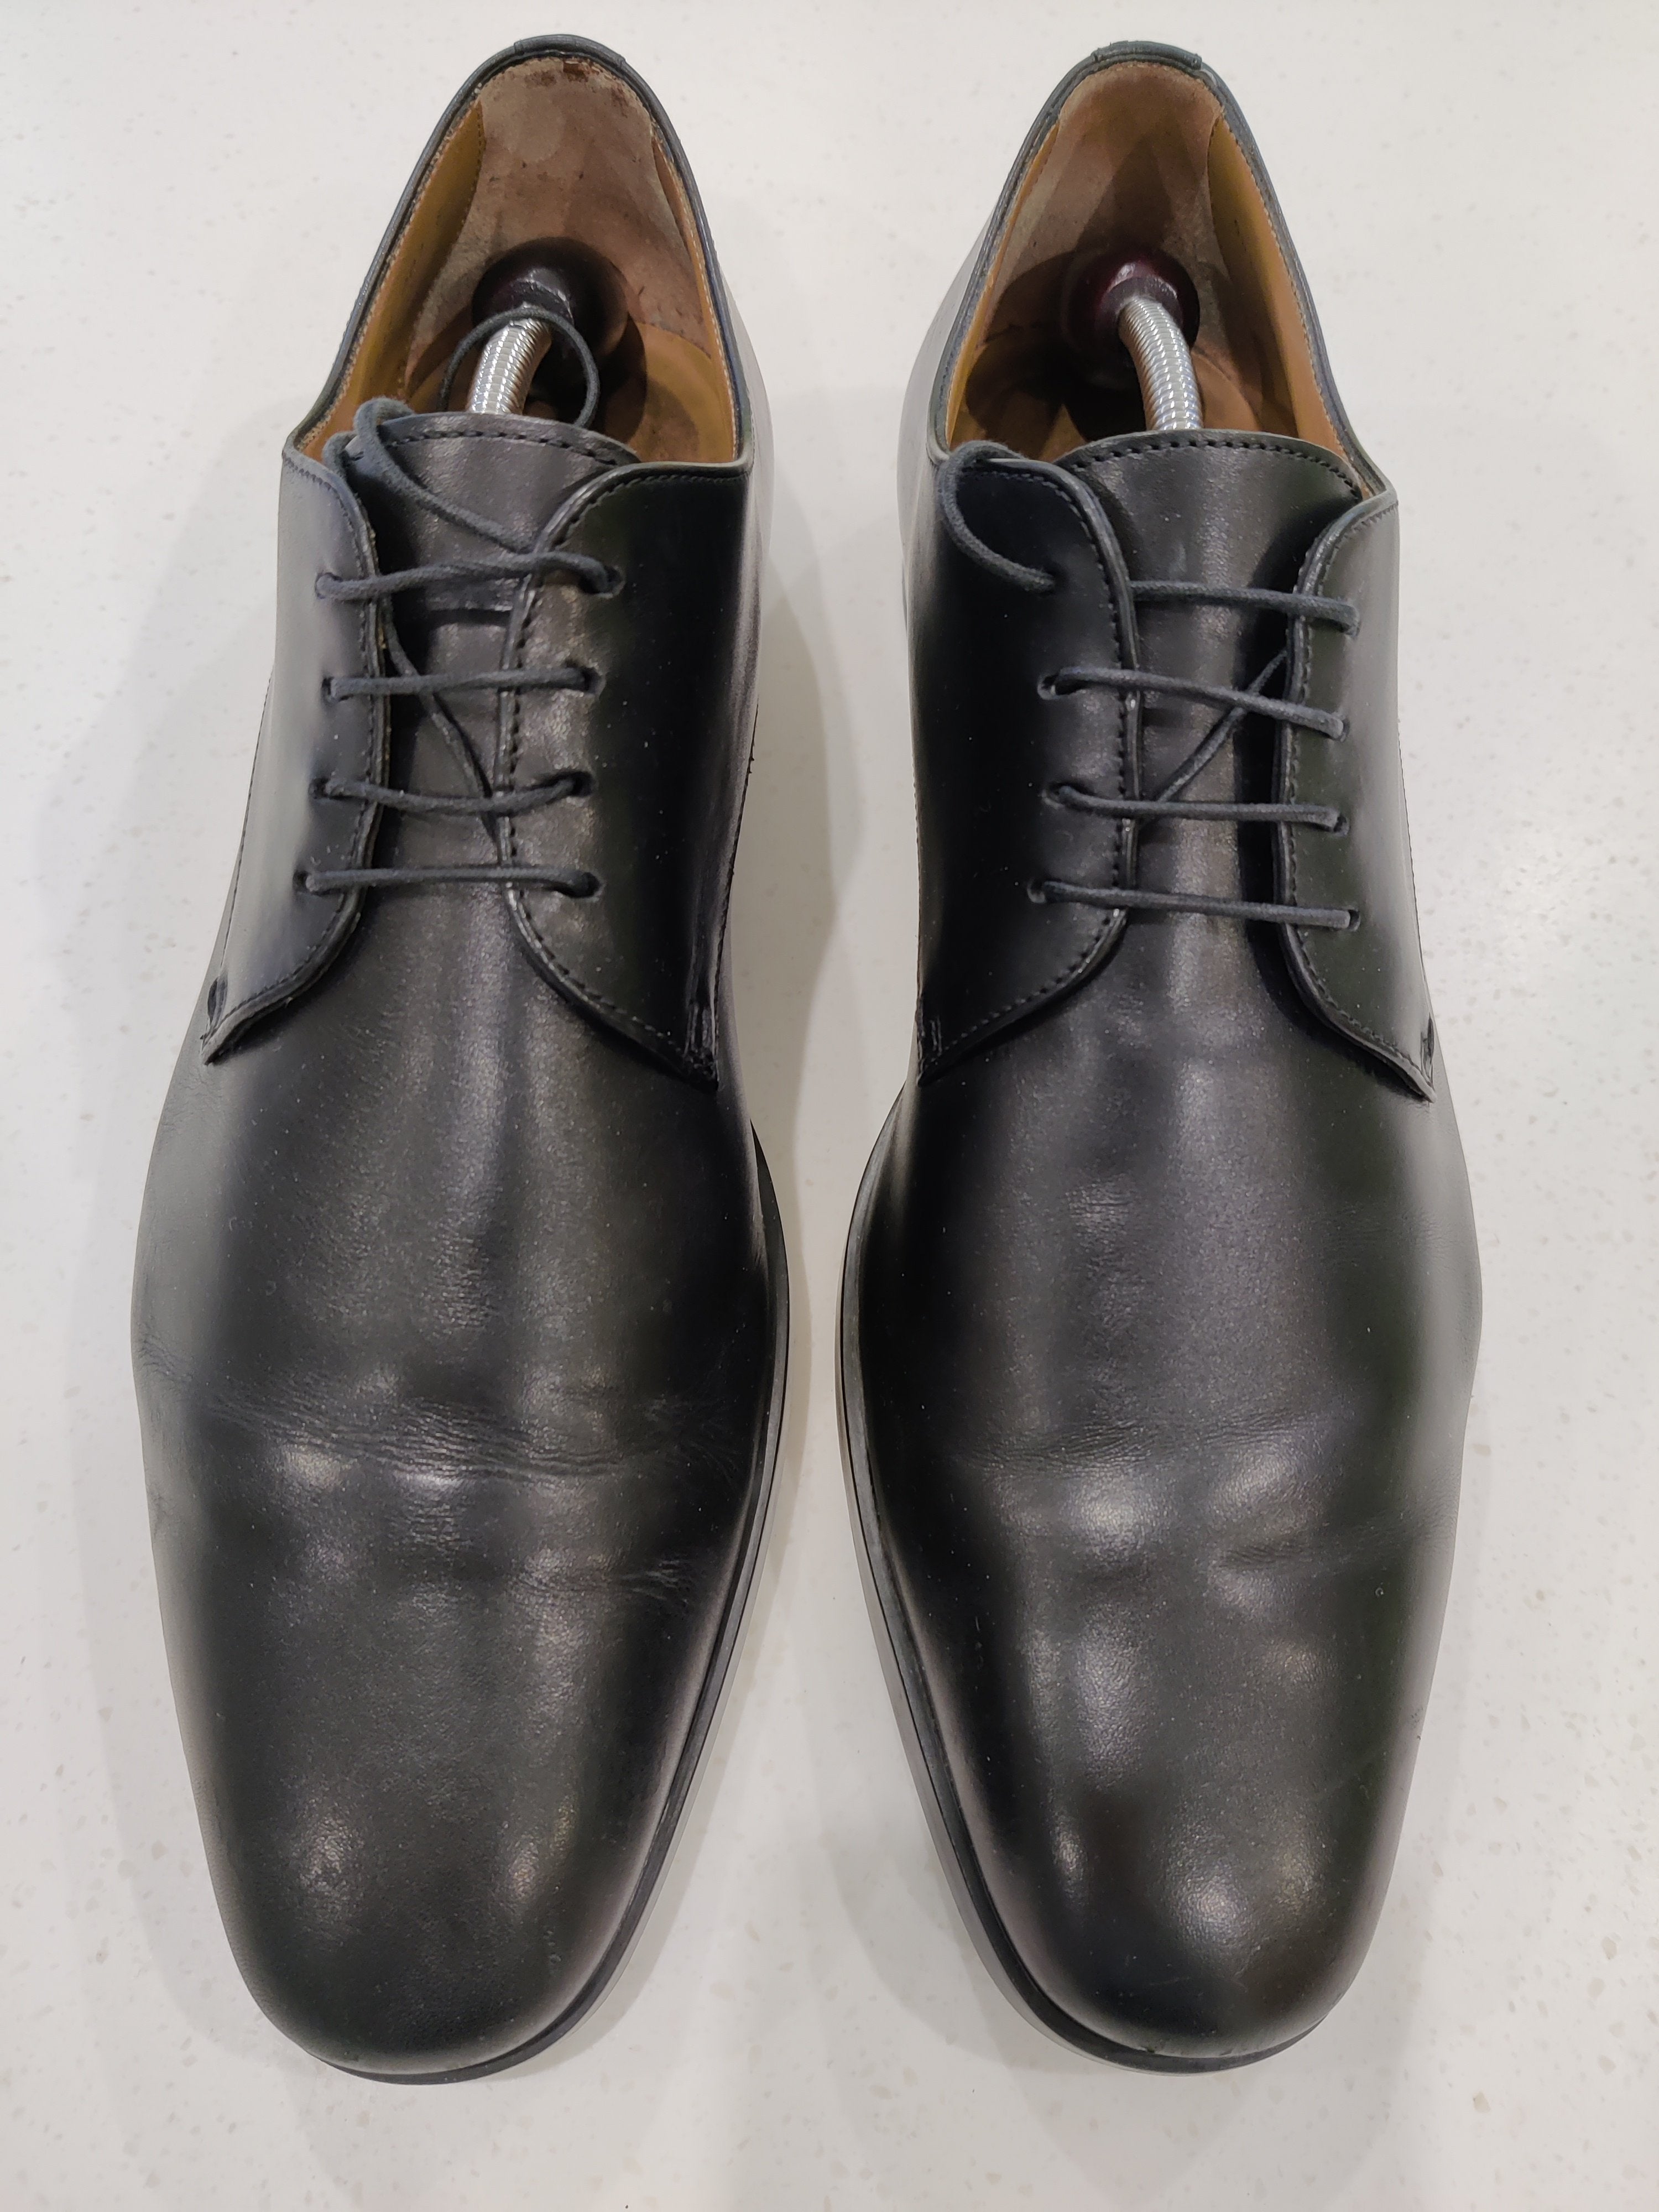 Caring for damp leather shoes overnight? | Men's Clothing Forums